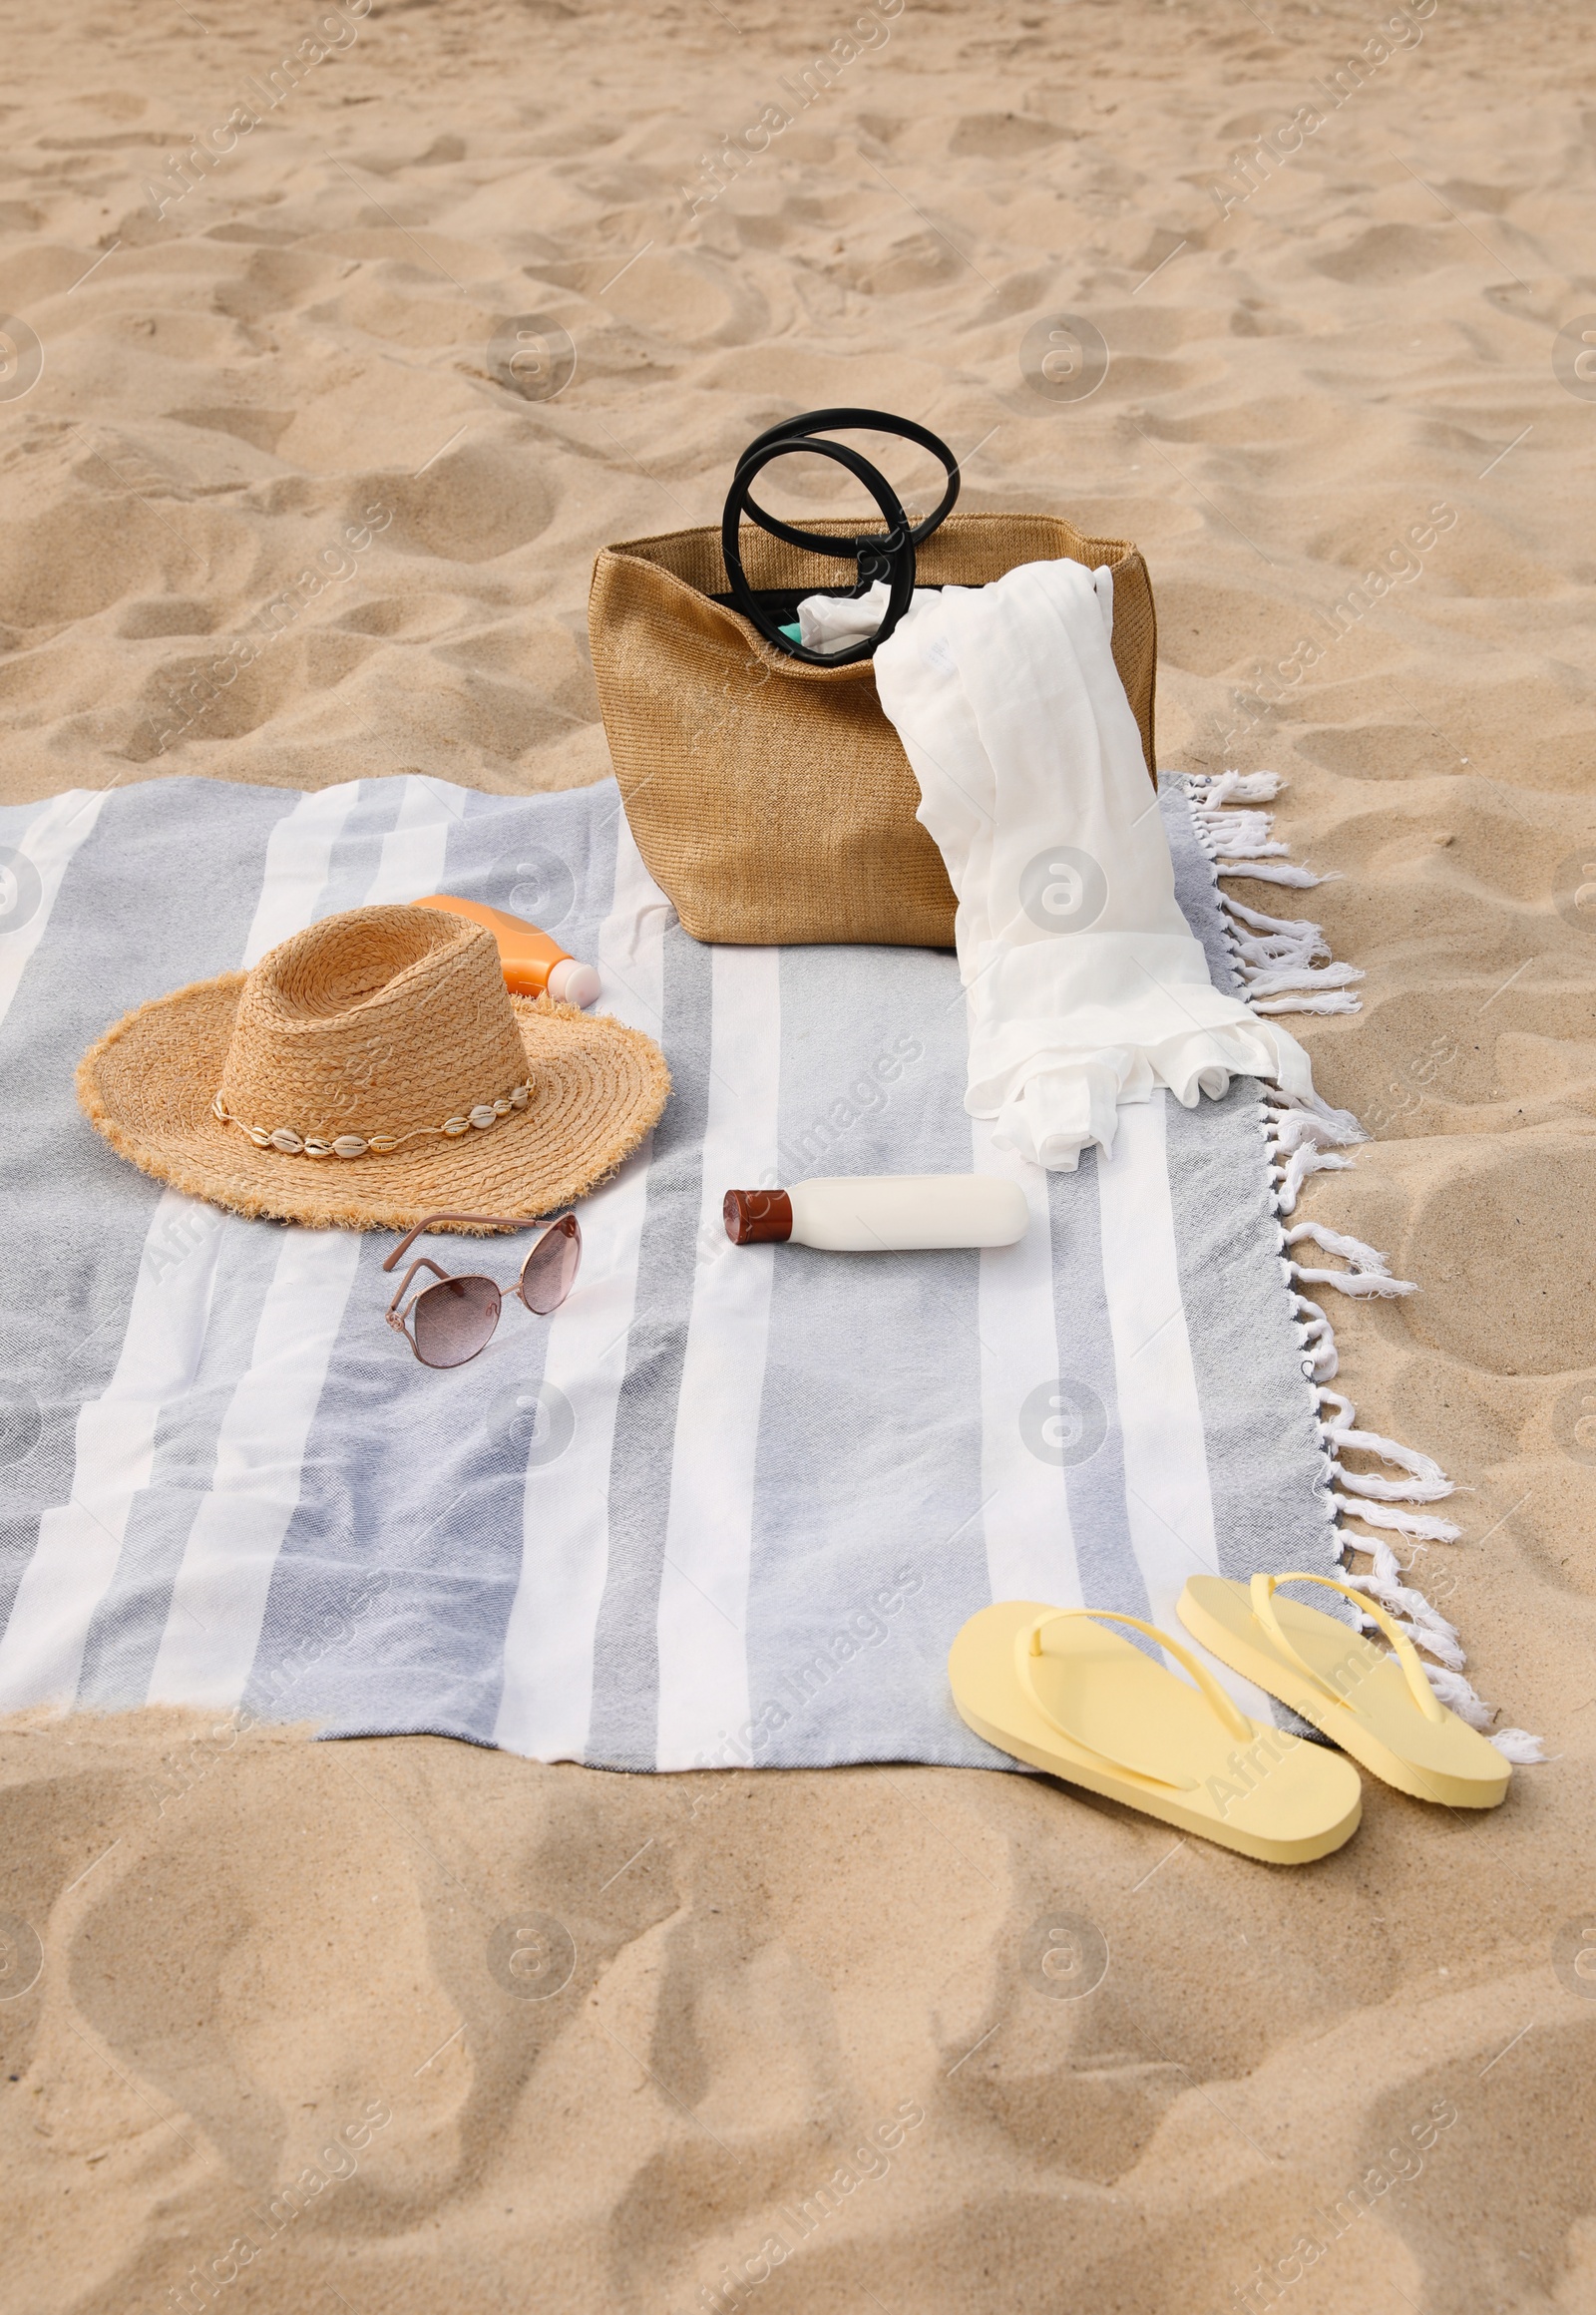 Photo of Bag and other beach items on sand